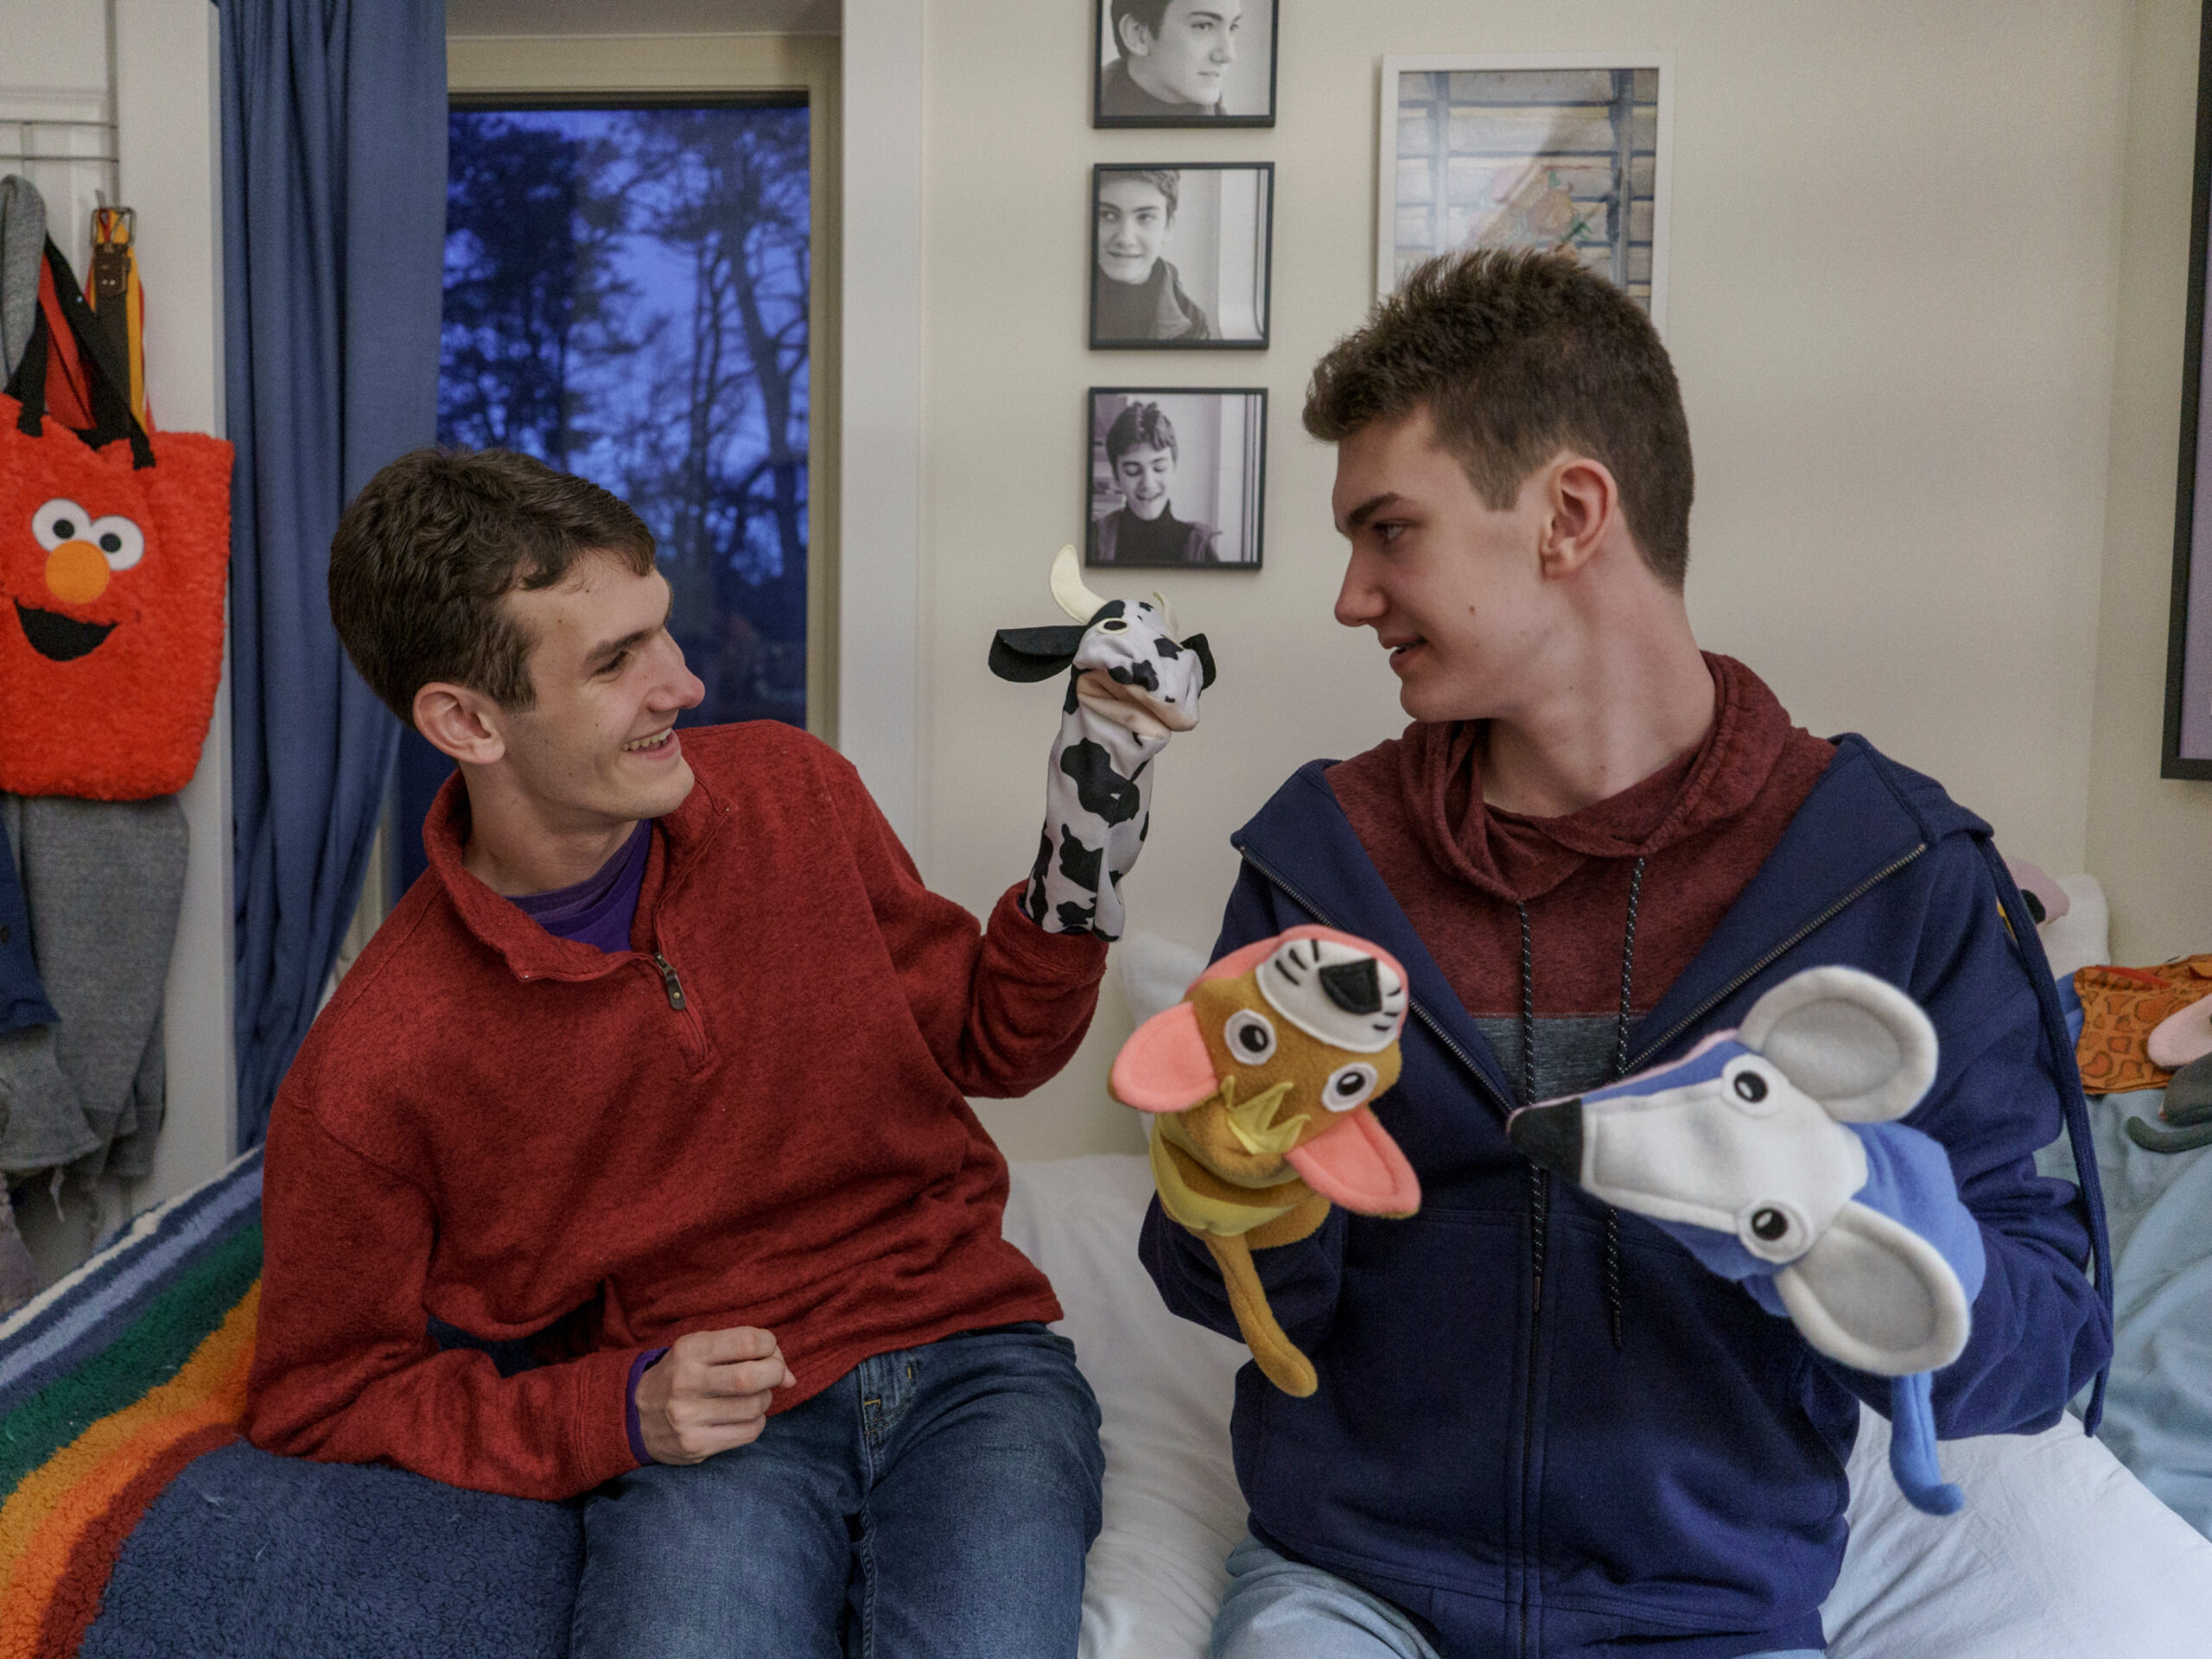 These identical twins both grew up with autism, but took very different paths